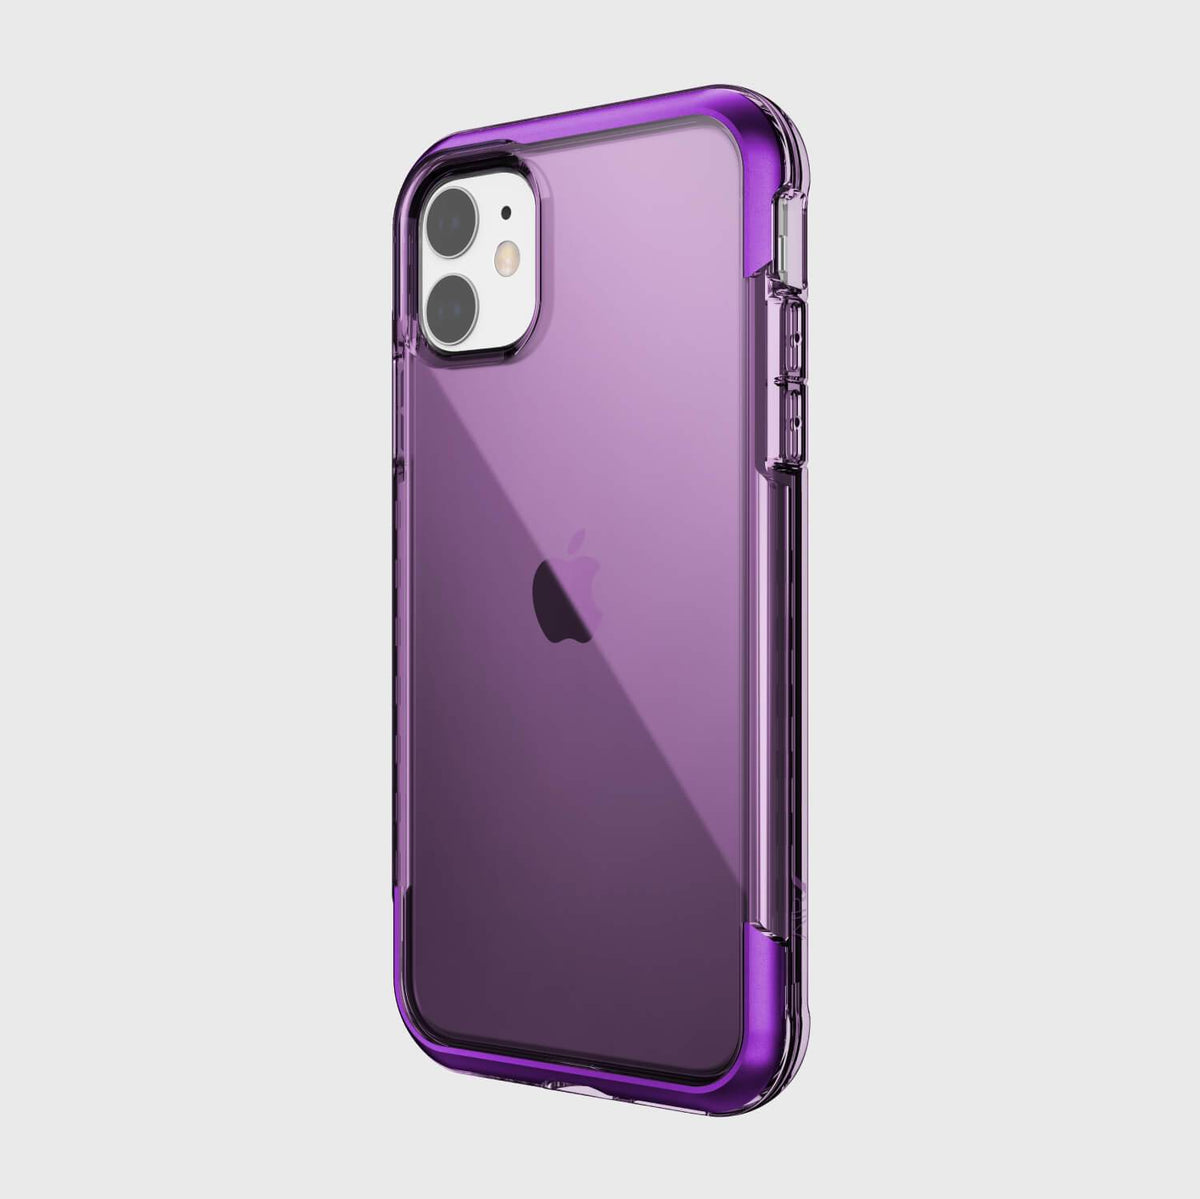 The purple Raptic Air iPhone 11 Pro Max case provides 13 foot drop protection on a white background.